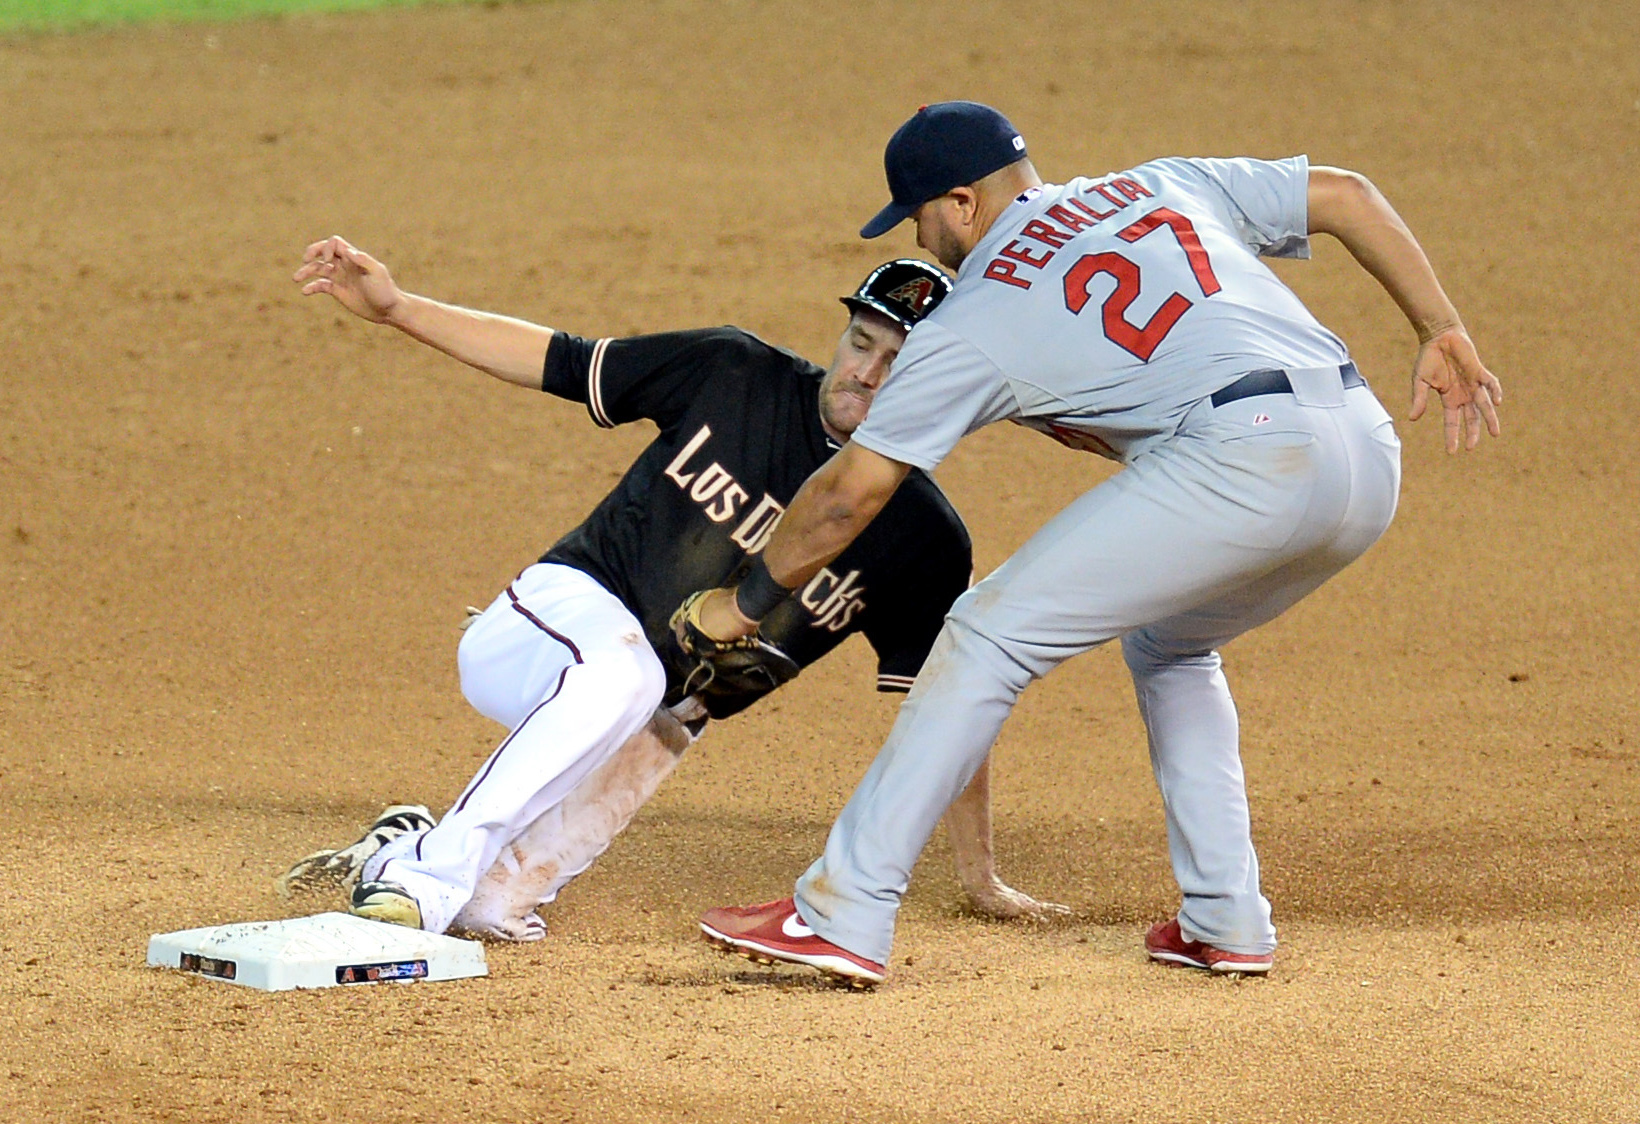 Jhonny Peralta tags out AJ Pollock in last season's September matchup.